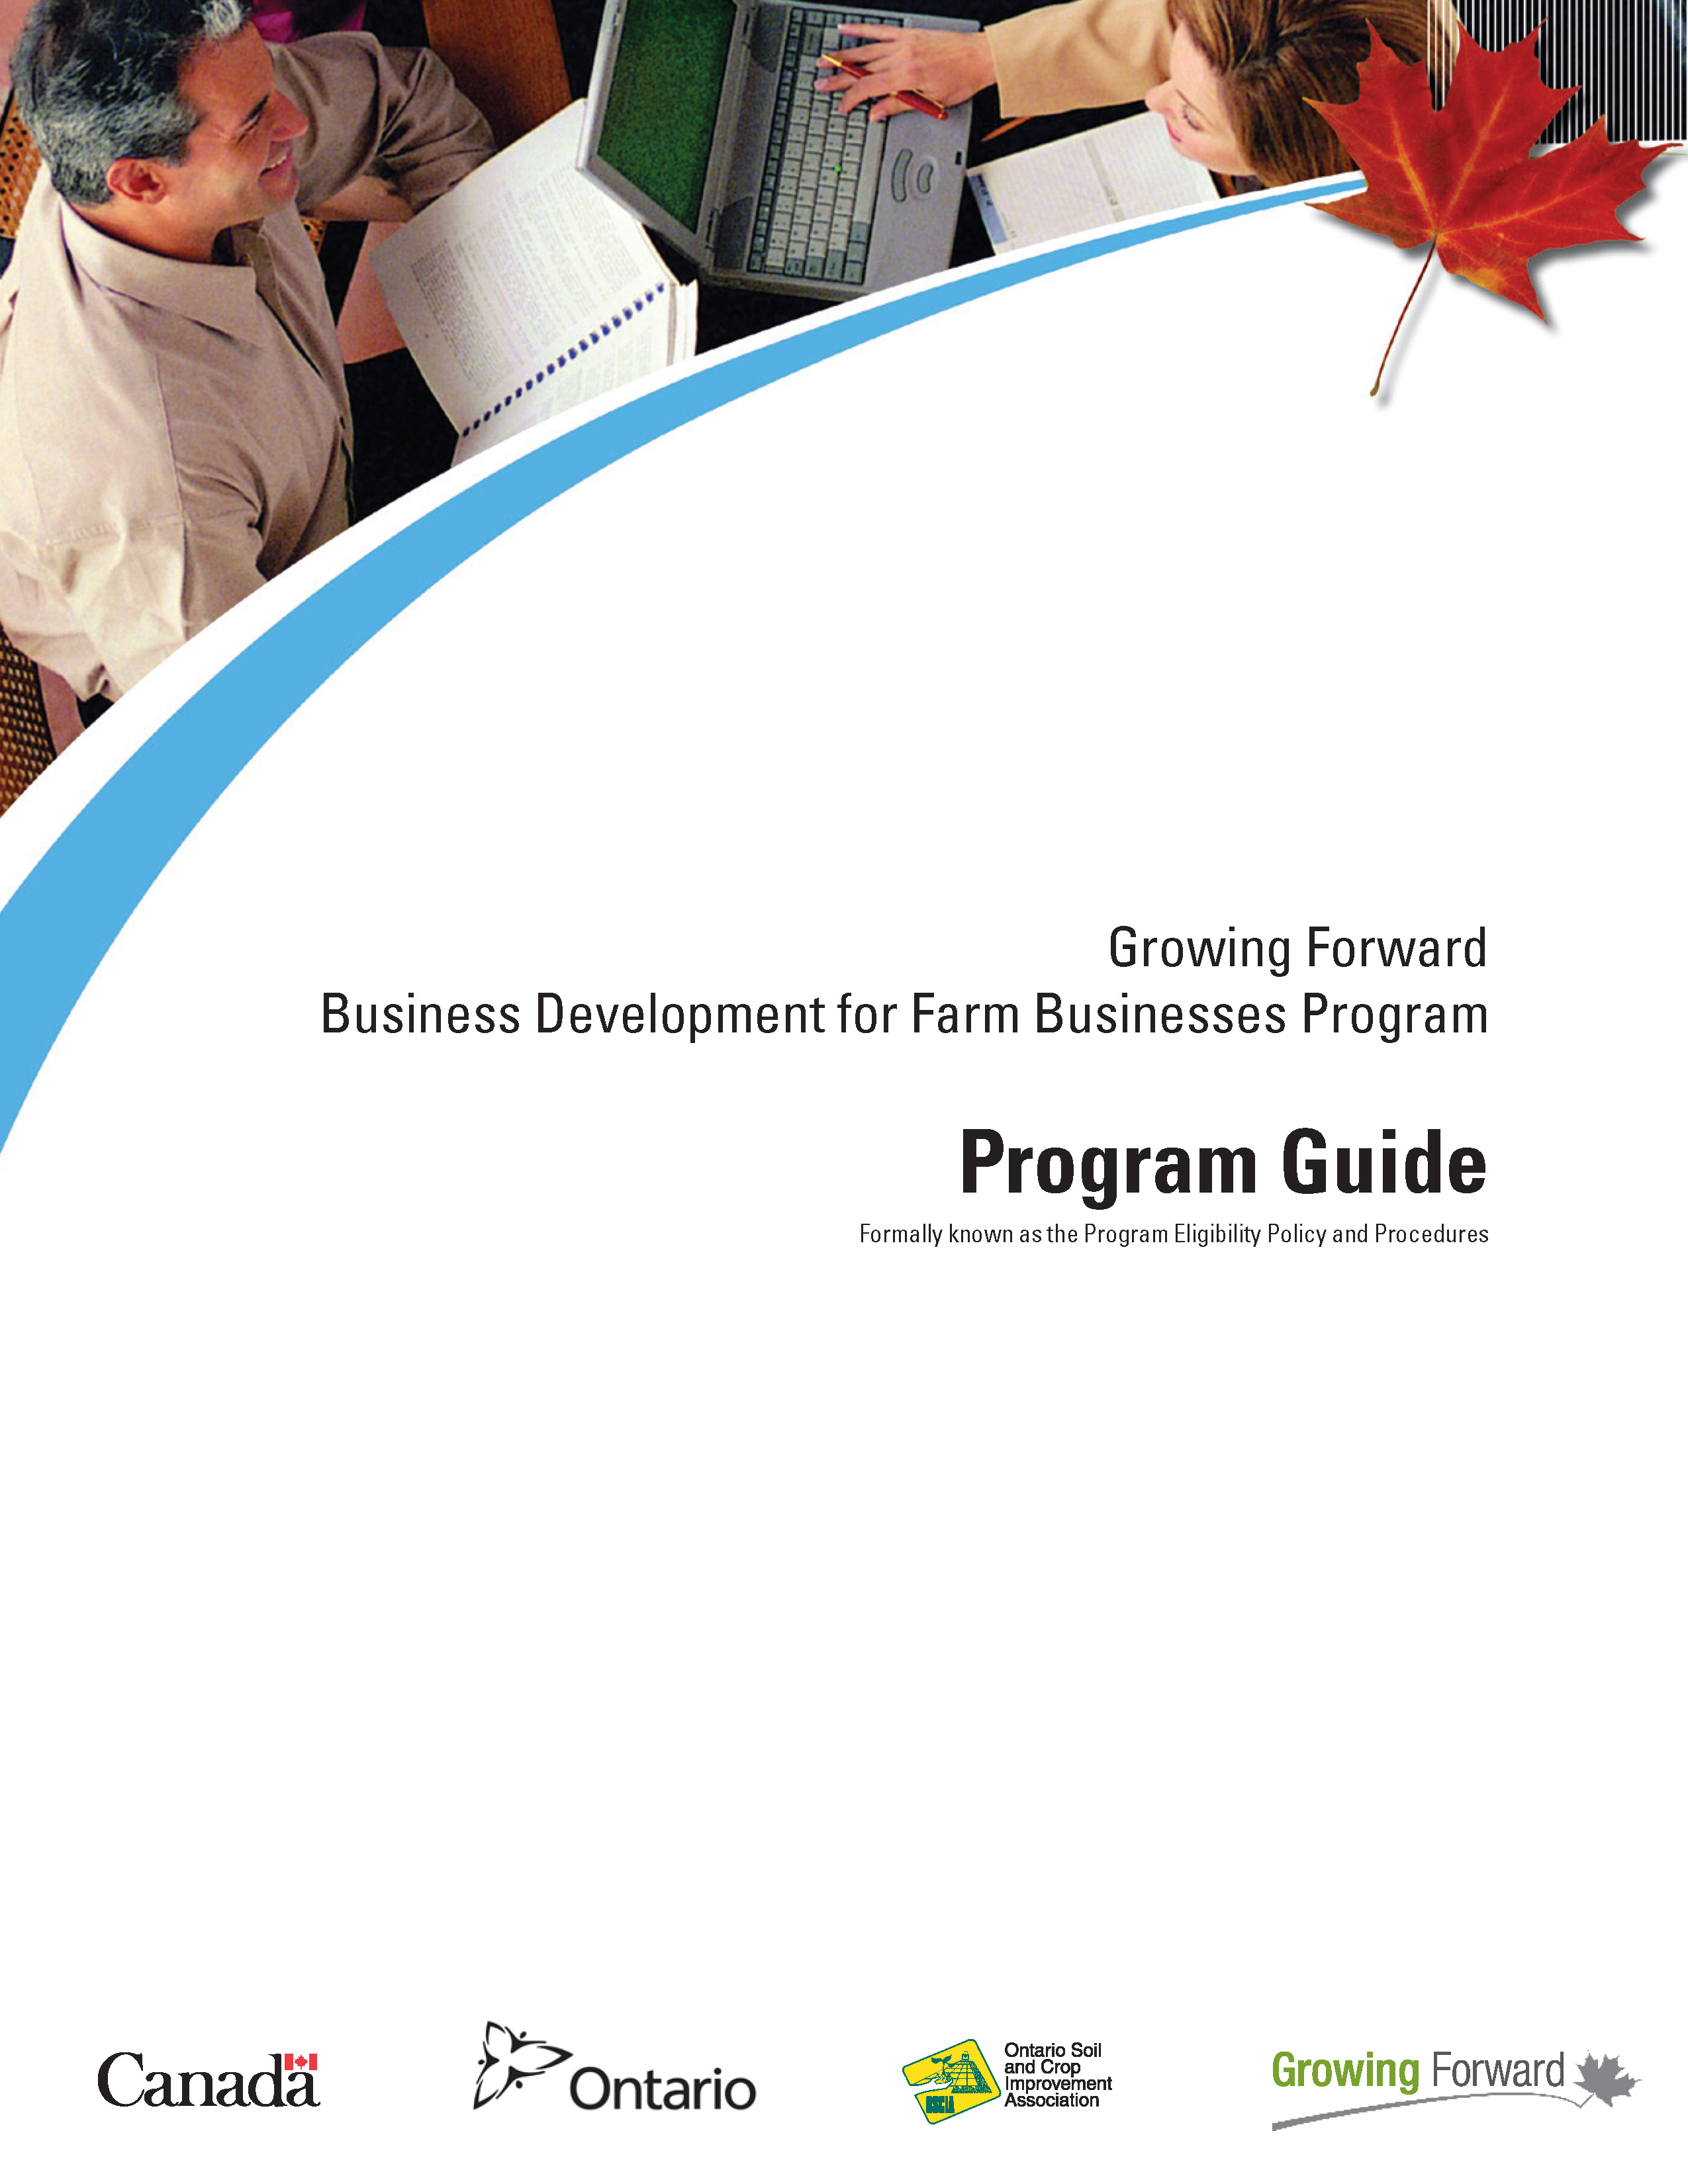 Image of a Program Guide cover page in English